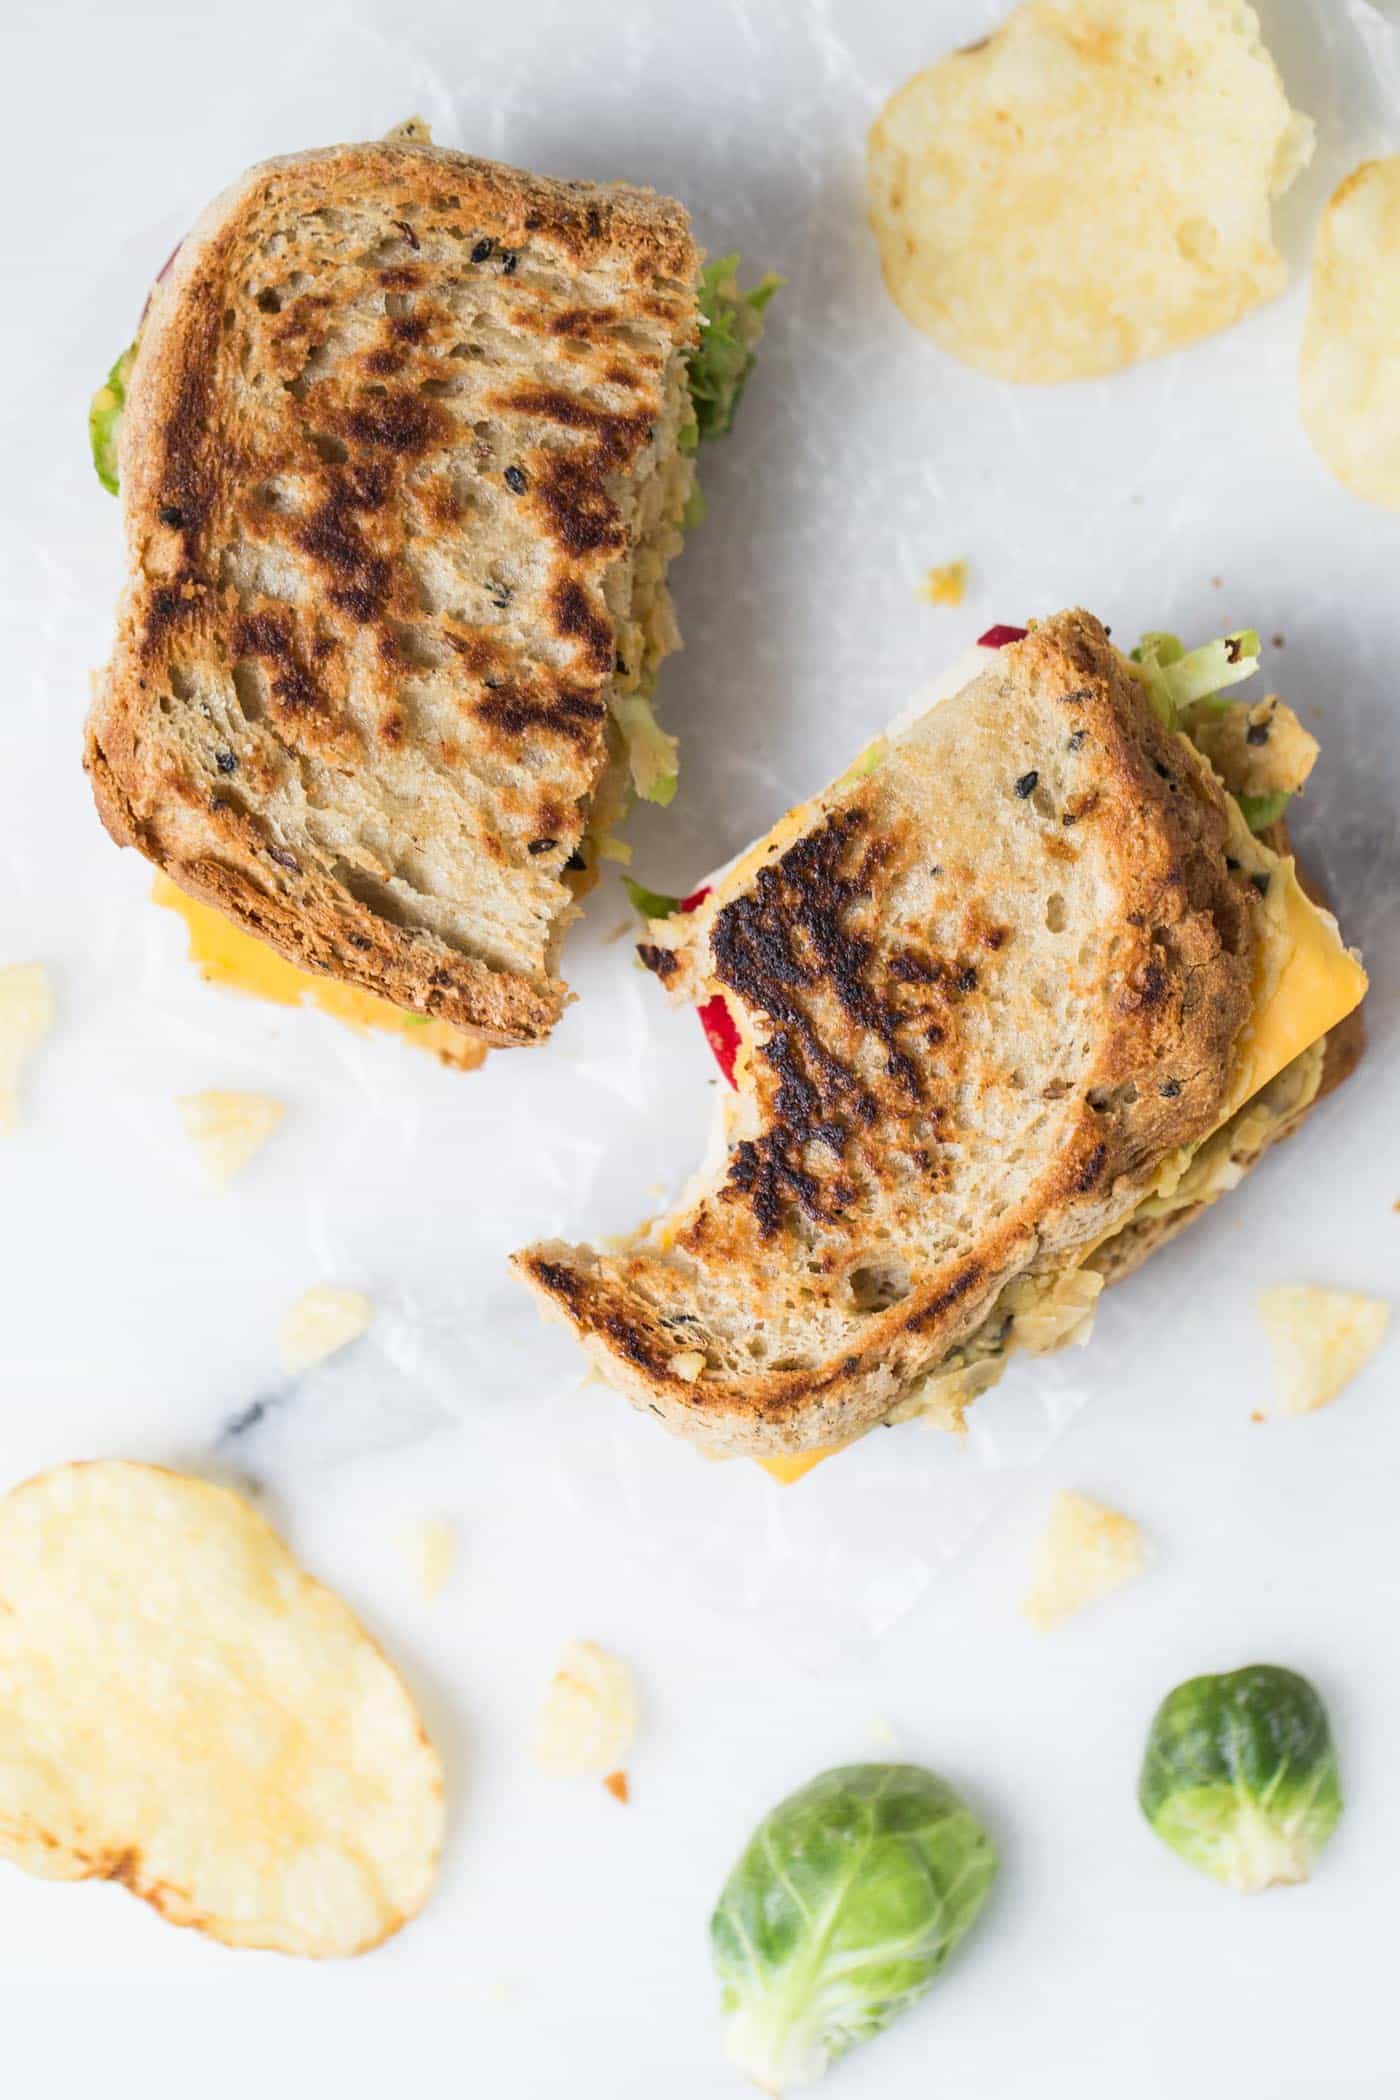 This is hands down THE BEST vegan grilled cheese ever! with brussels sprouts, hummus, apples and more!